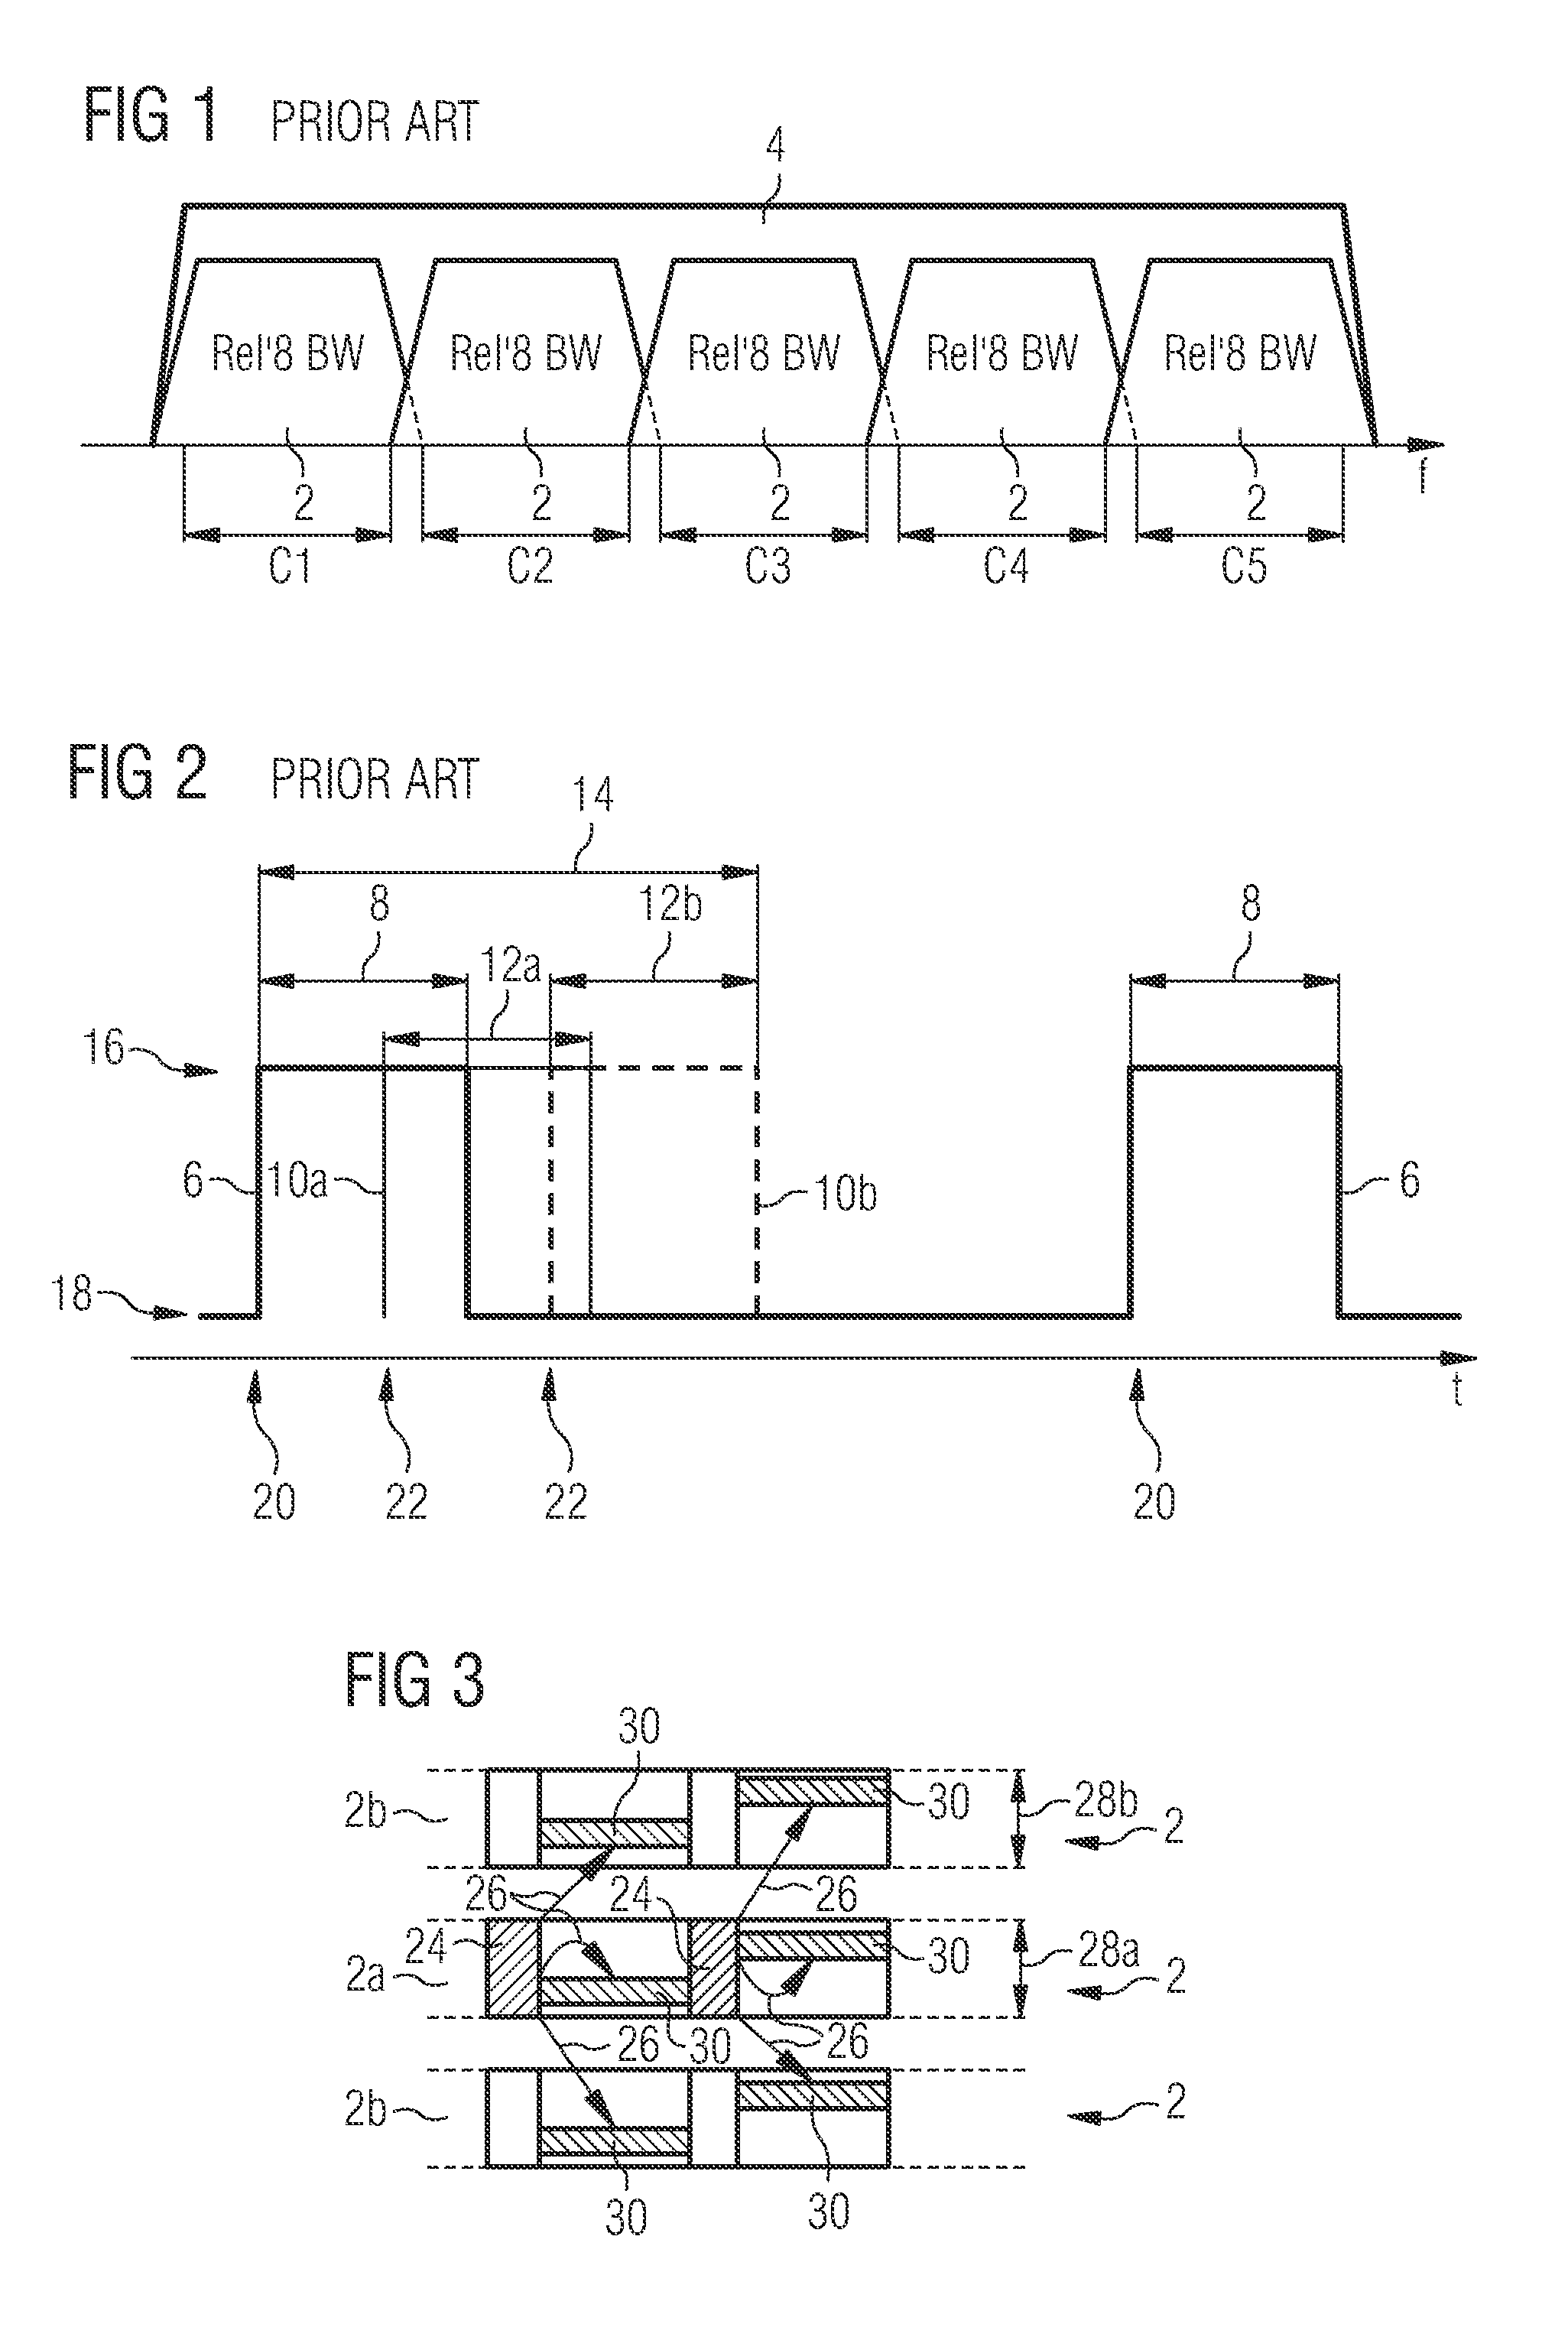 Discontinuous Reception in Carrier Aggregation Wireless Communication Systems